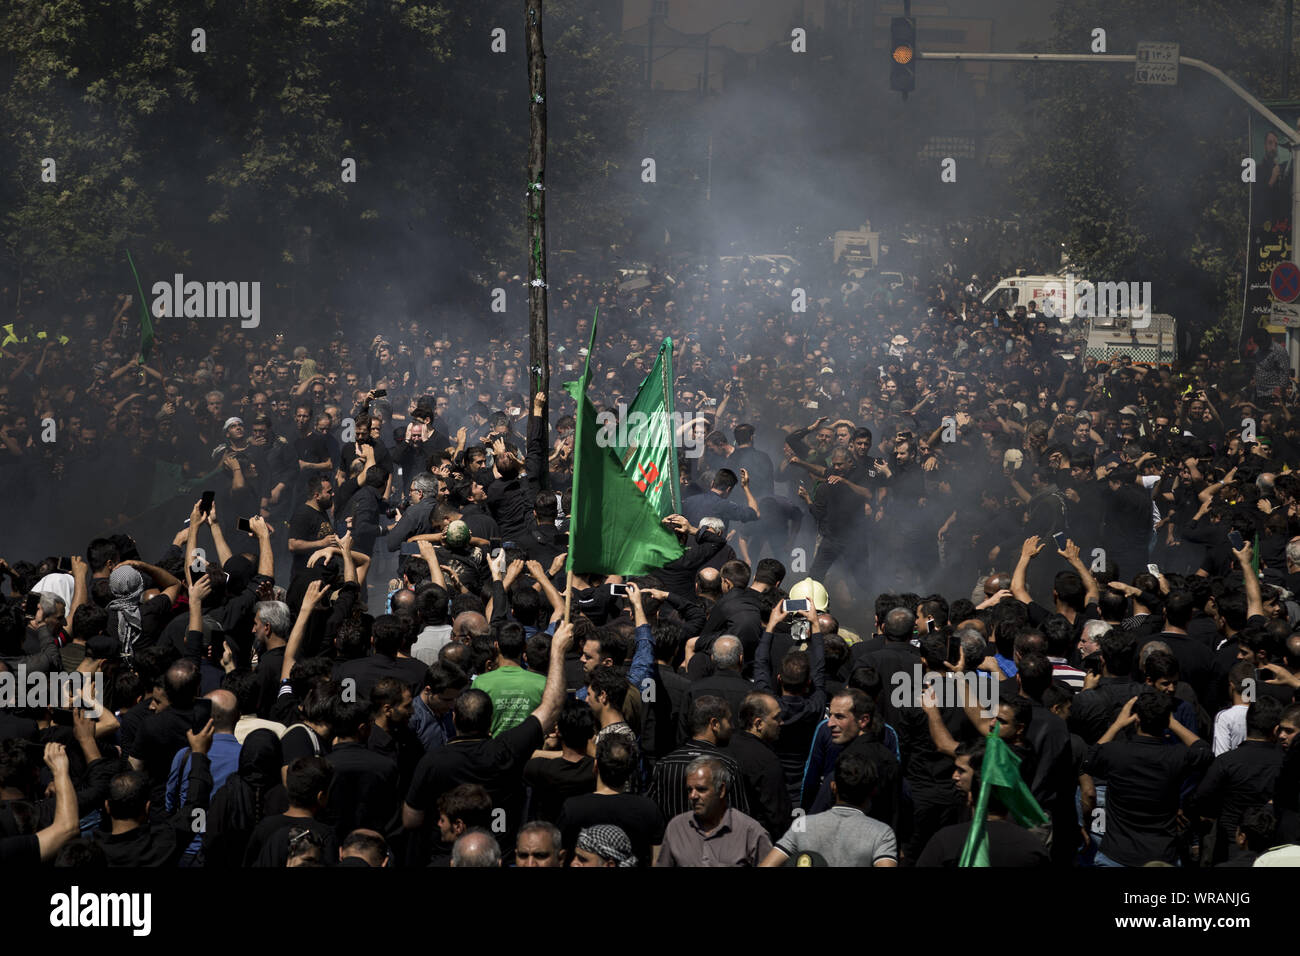 September 10, 2019, Tehran, Tehran, Iran: Iranians burn a tent as they perform at the Ashura ceremonies in Tehran, Iran. The Ashura day commemorates the death anniversary of the third Shiite Imam Hussein, who was the grandson of Muslim Prophet Muhammed. Ashura is the peak of ten days of mourning when Shiite Muslims mourn the killing of Imam Hussein whose shrine is in Karbala in southern Iraq. (Credit Image: © Rouzbeh Fouladi/ZUMA Wire) Stock Photo